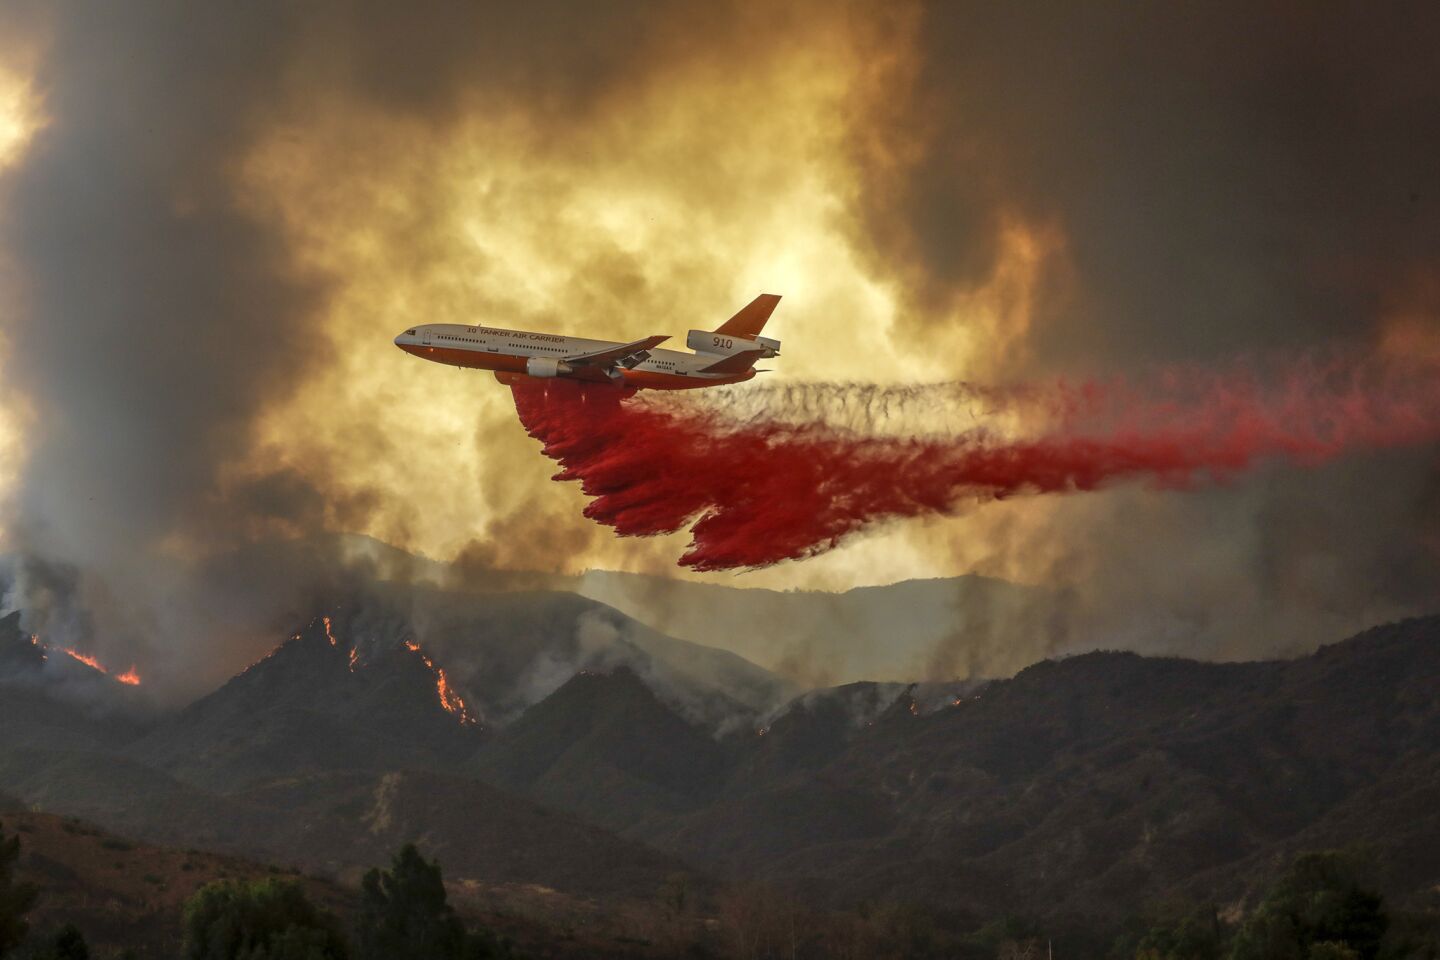 An air tanker fights the Holy fire, which forced more evacuations of neighborhoods in the Lake Elsinore area Wednesday.